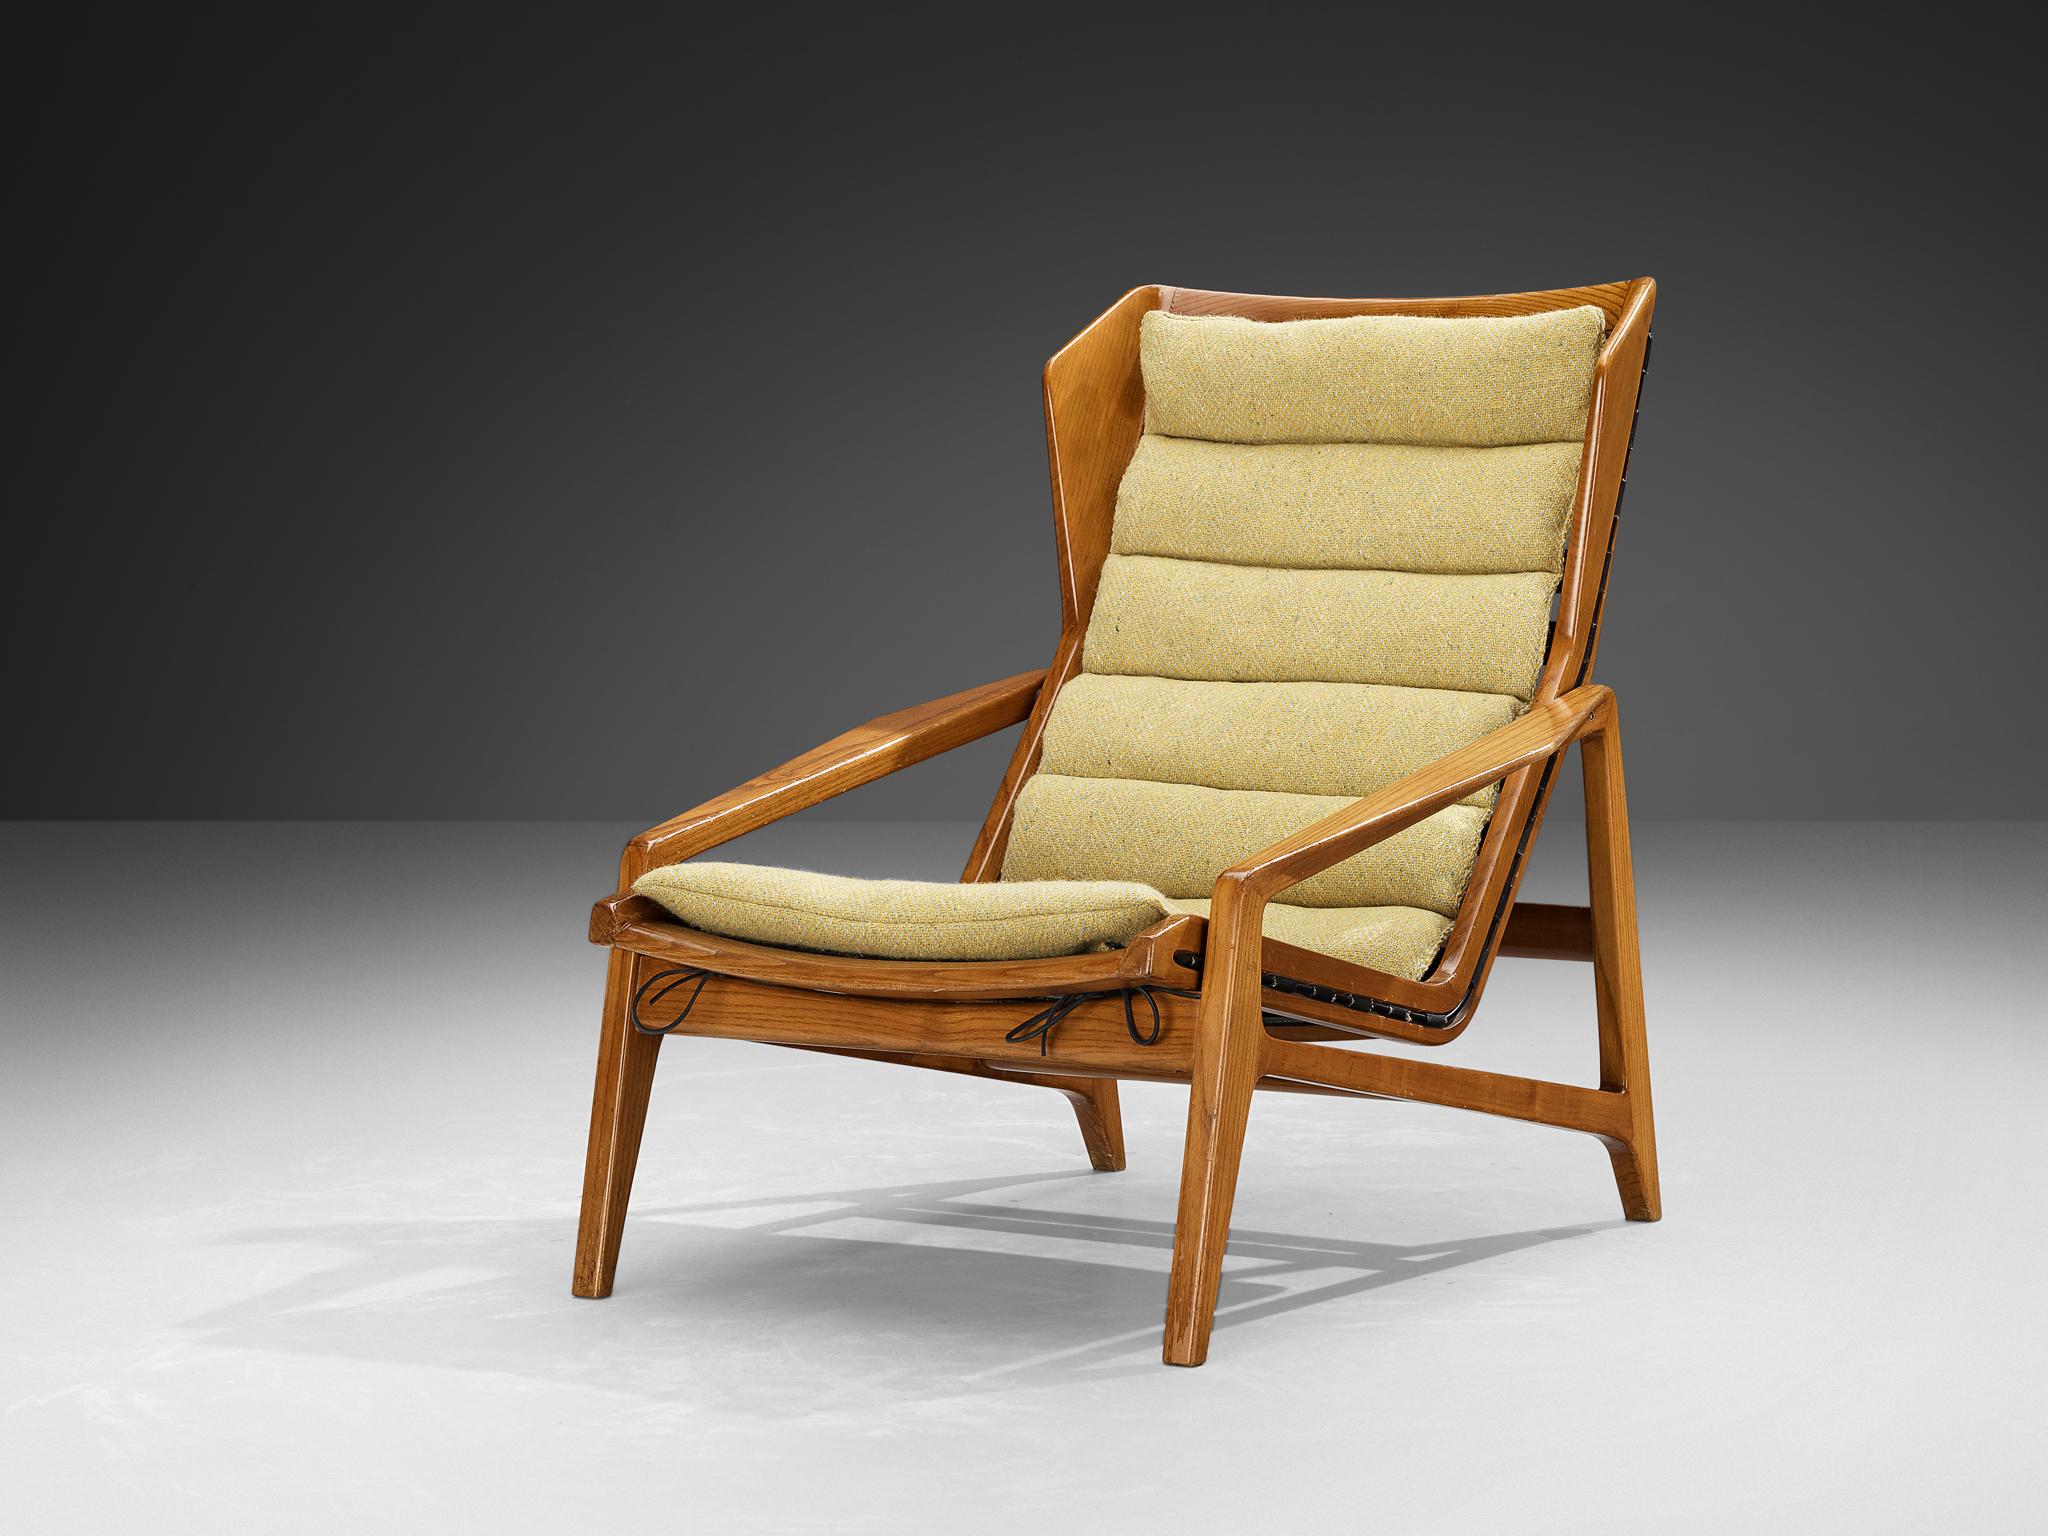 Gio Ponti for Figli di Amadeo Cassina, lounge chair, model ‘811’, chestnut, fabric, rubber, coated metal, Italy, design 1957

Made in 1957, this rare lounge chair model ‘811’ is designed by Gio Ponti for Figli di Amadeo Cassina. This armchair is